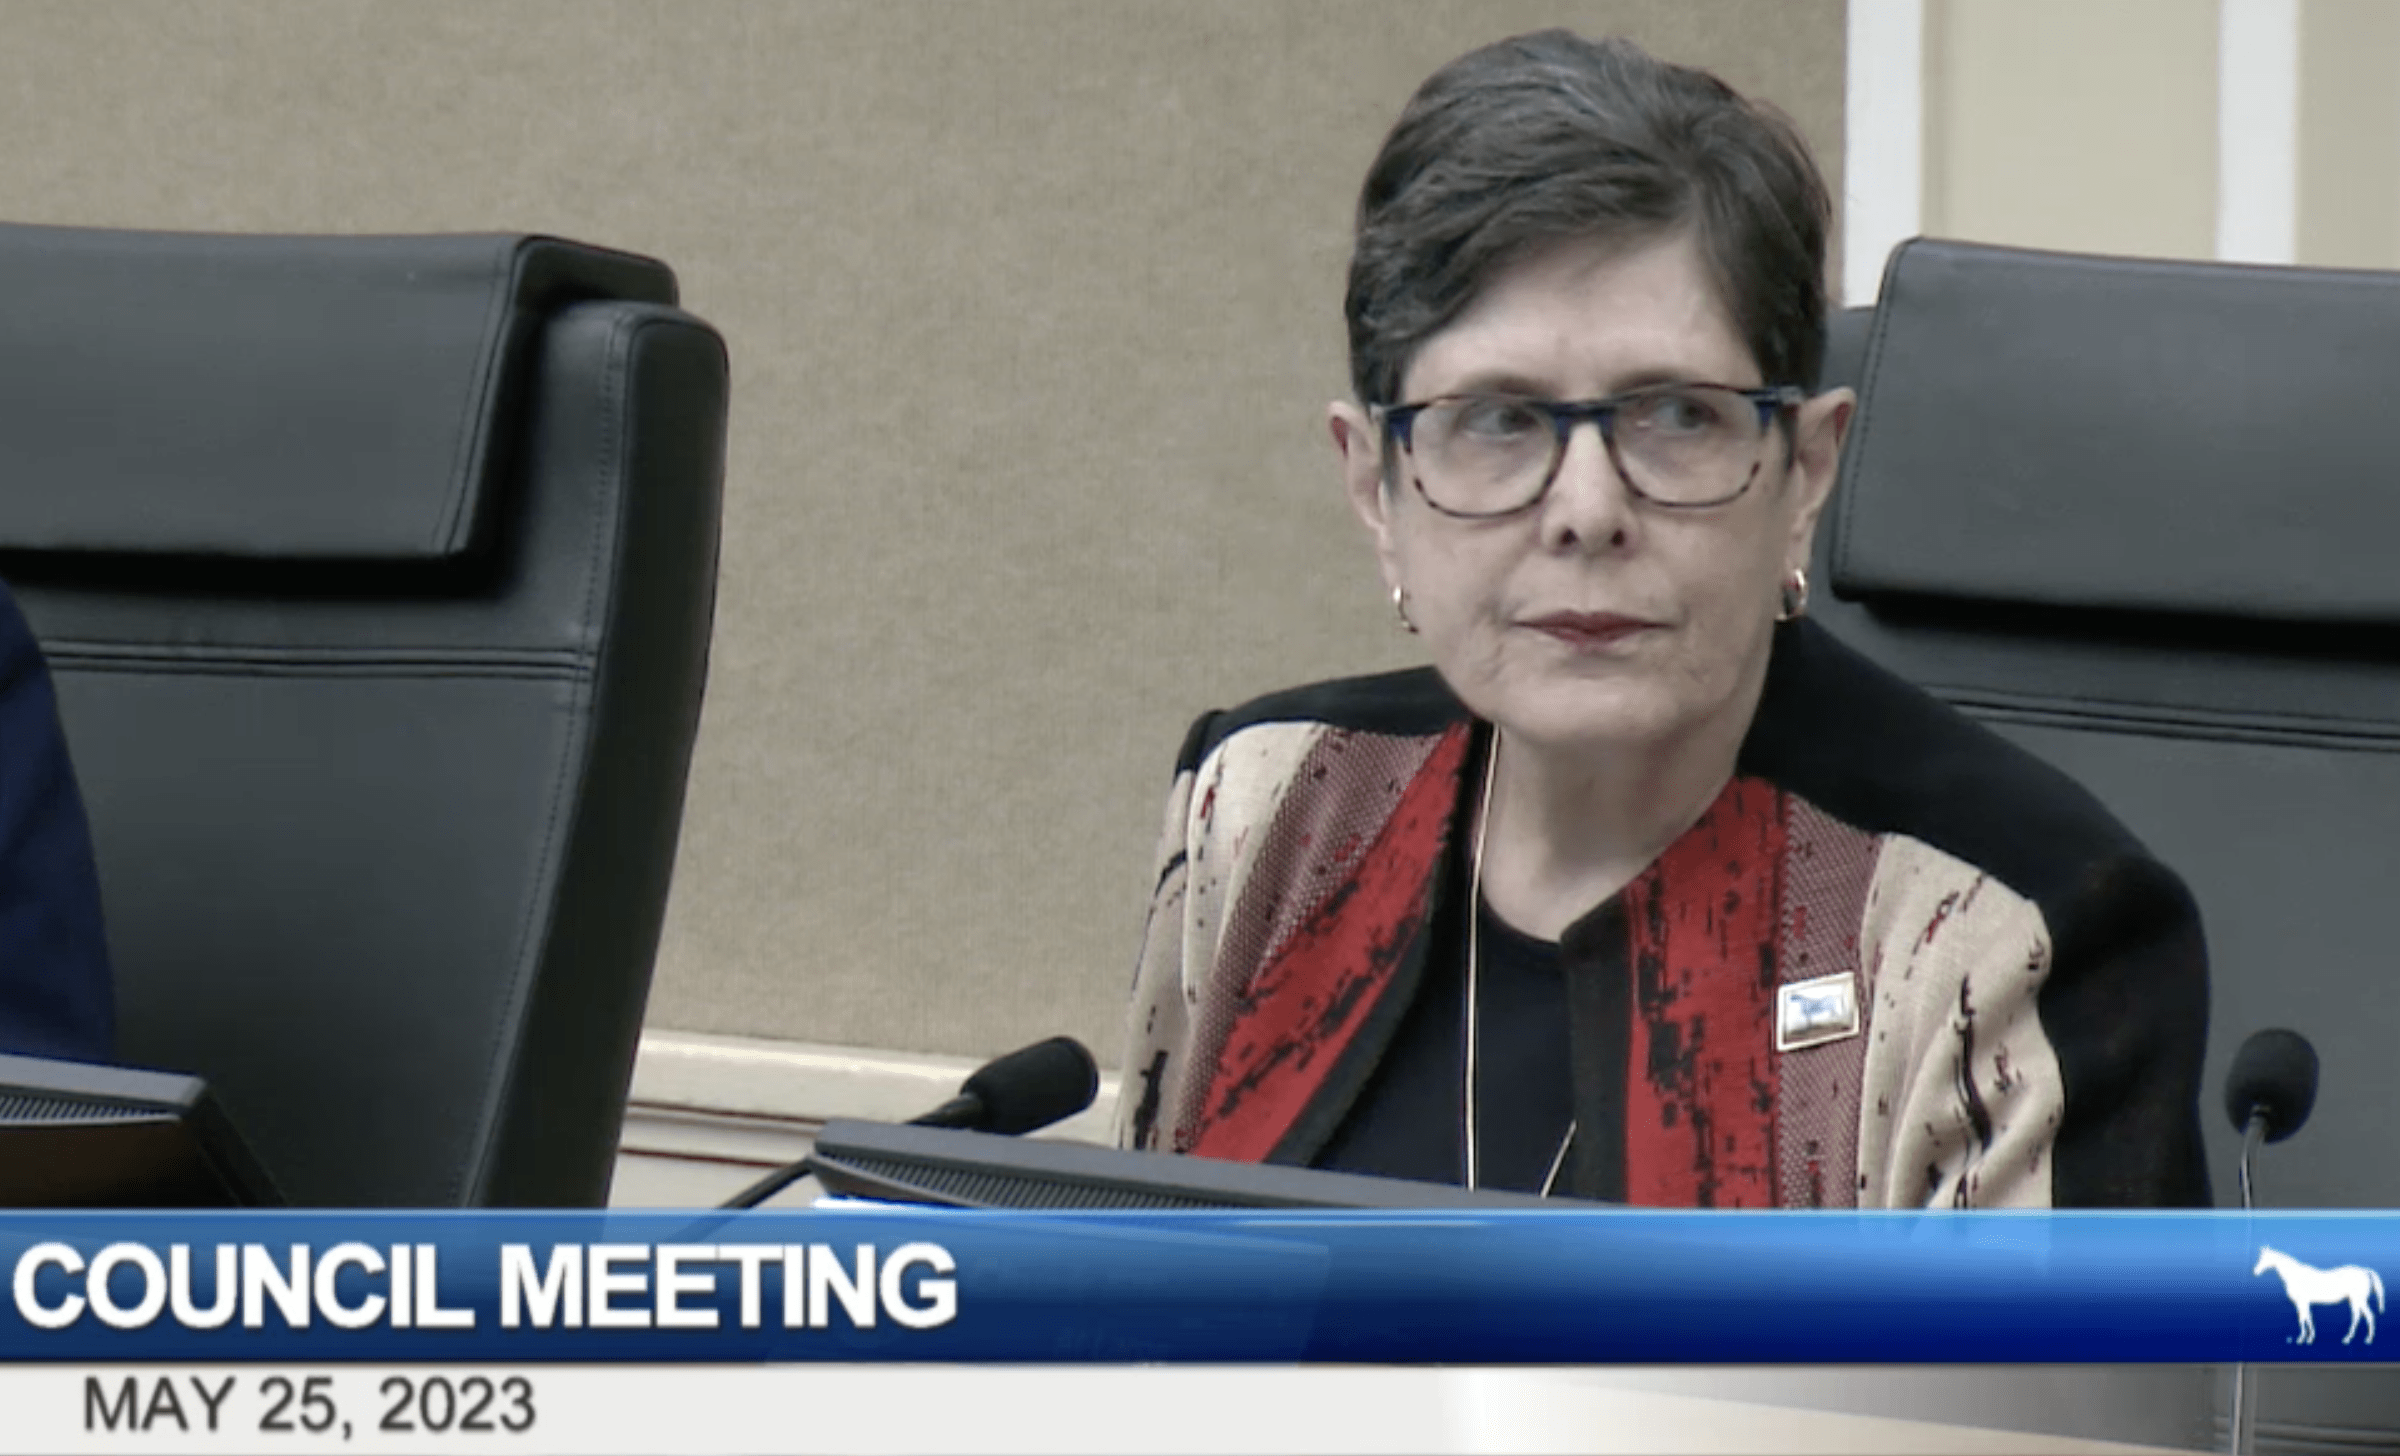 Mayor Gorton Appoints Board Members, Approves Price Contracts at Council Meeting